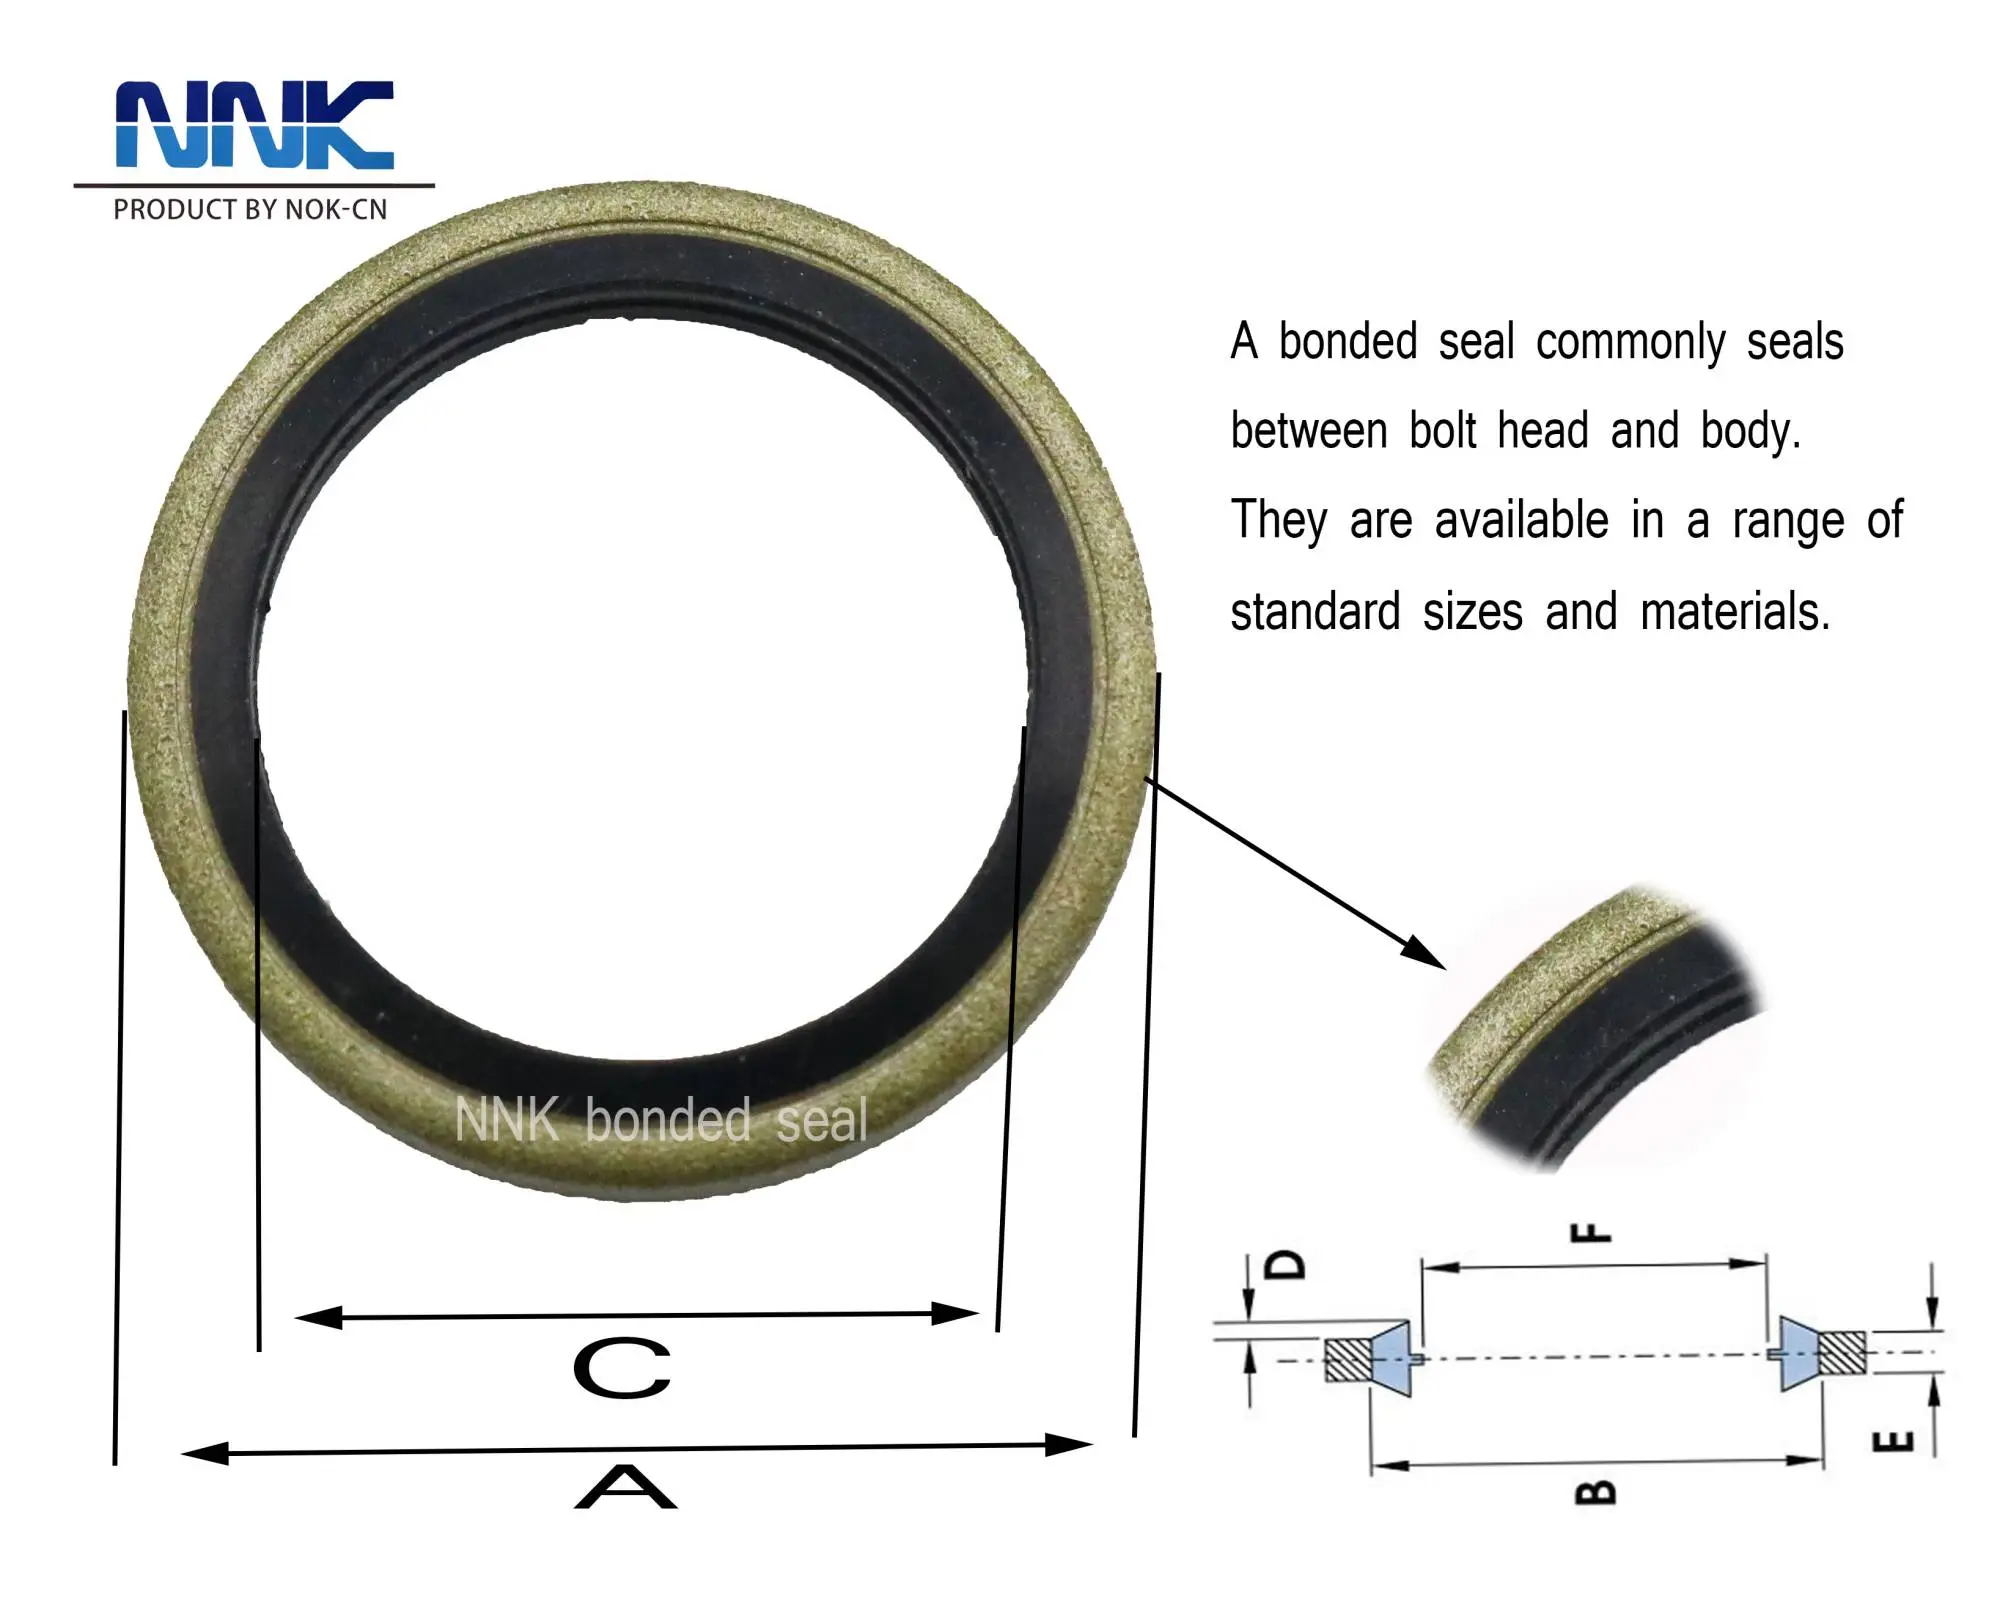 What are the standards for bonded sealing gaskets and how much does a self centering bonded seal cost？